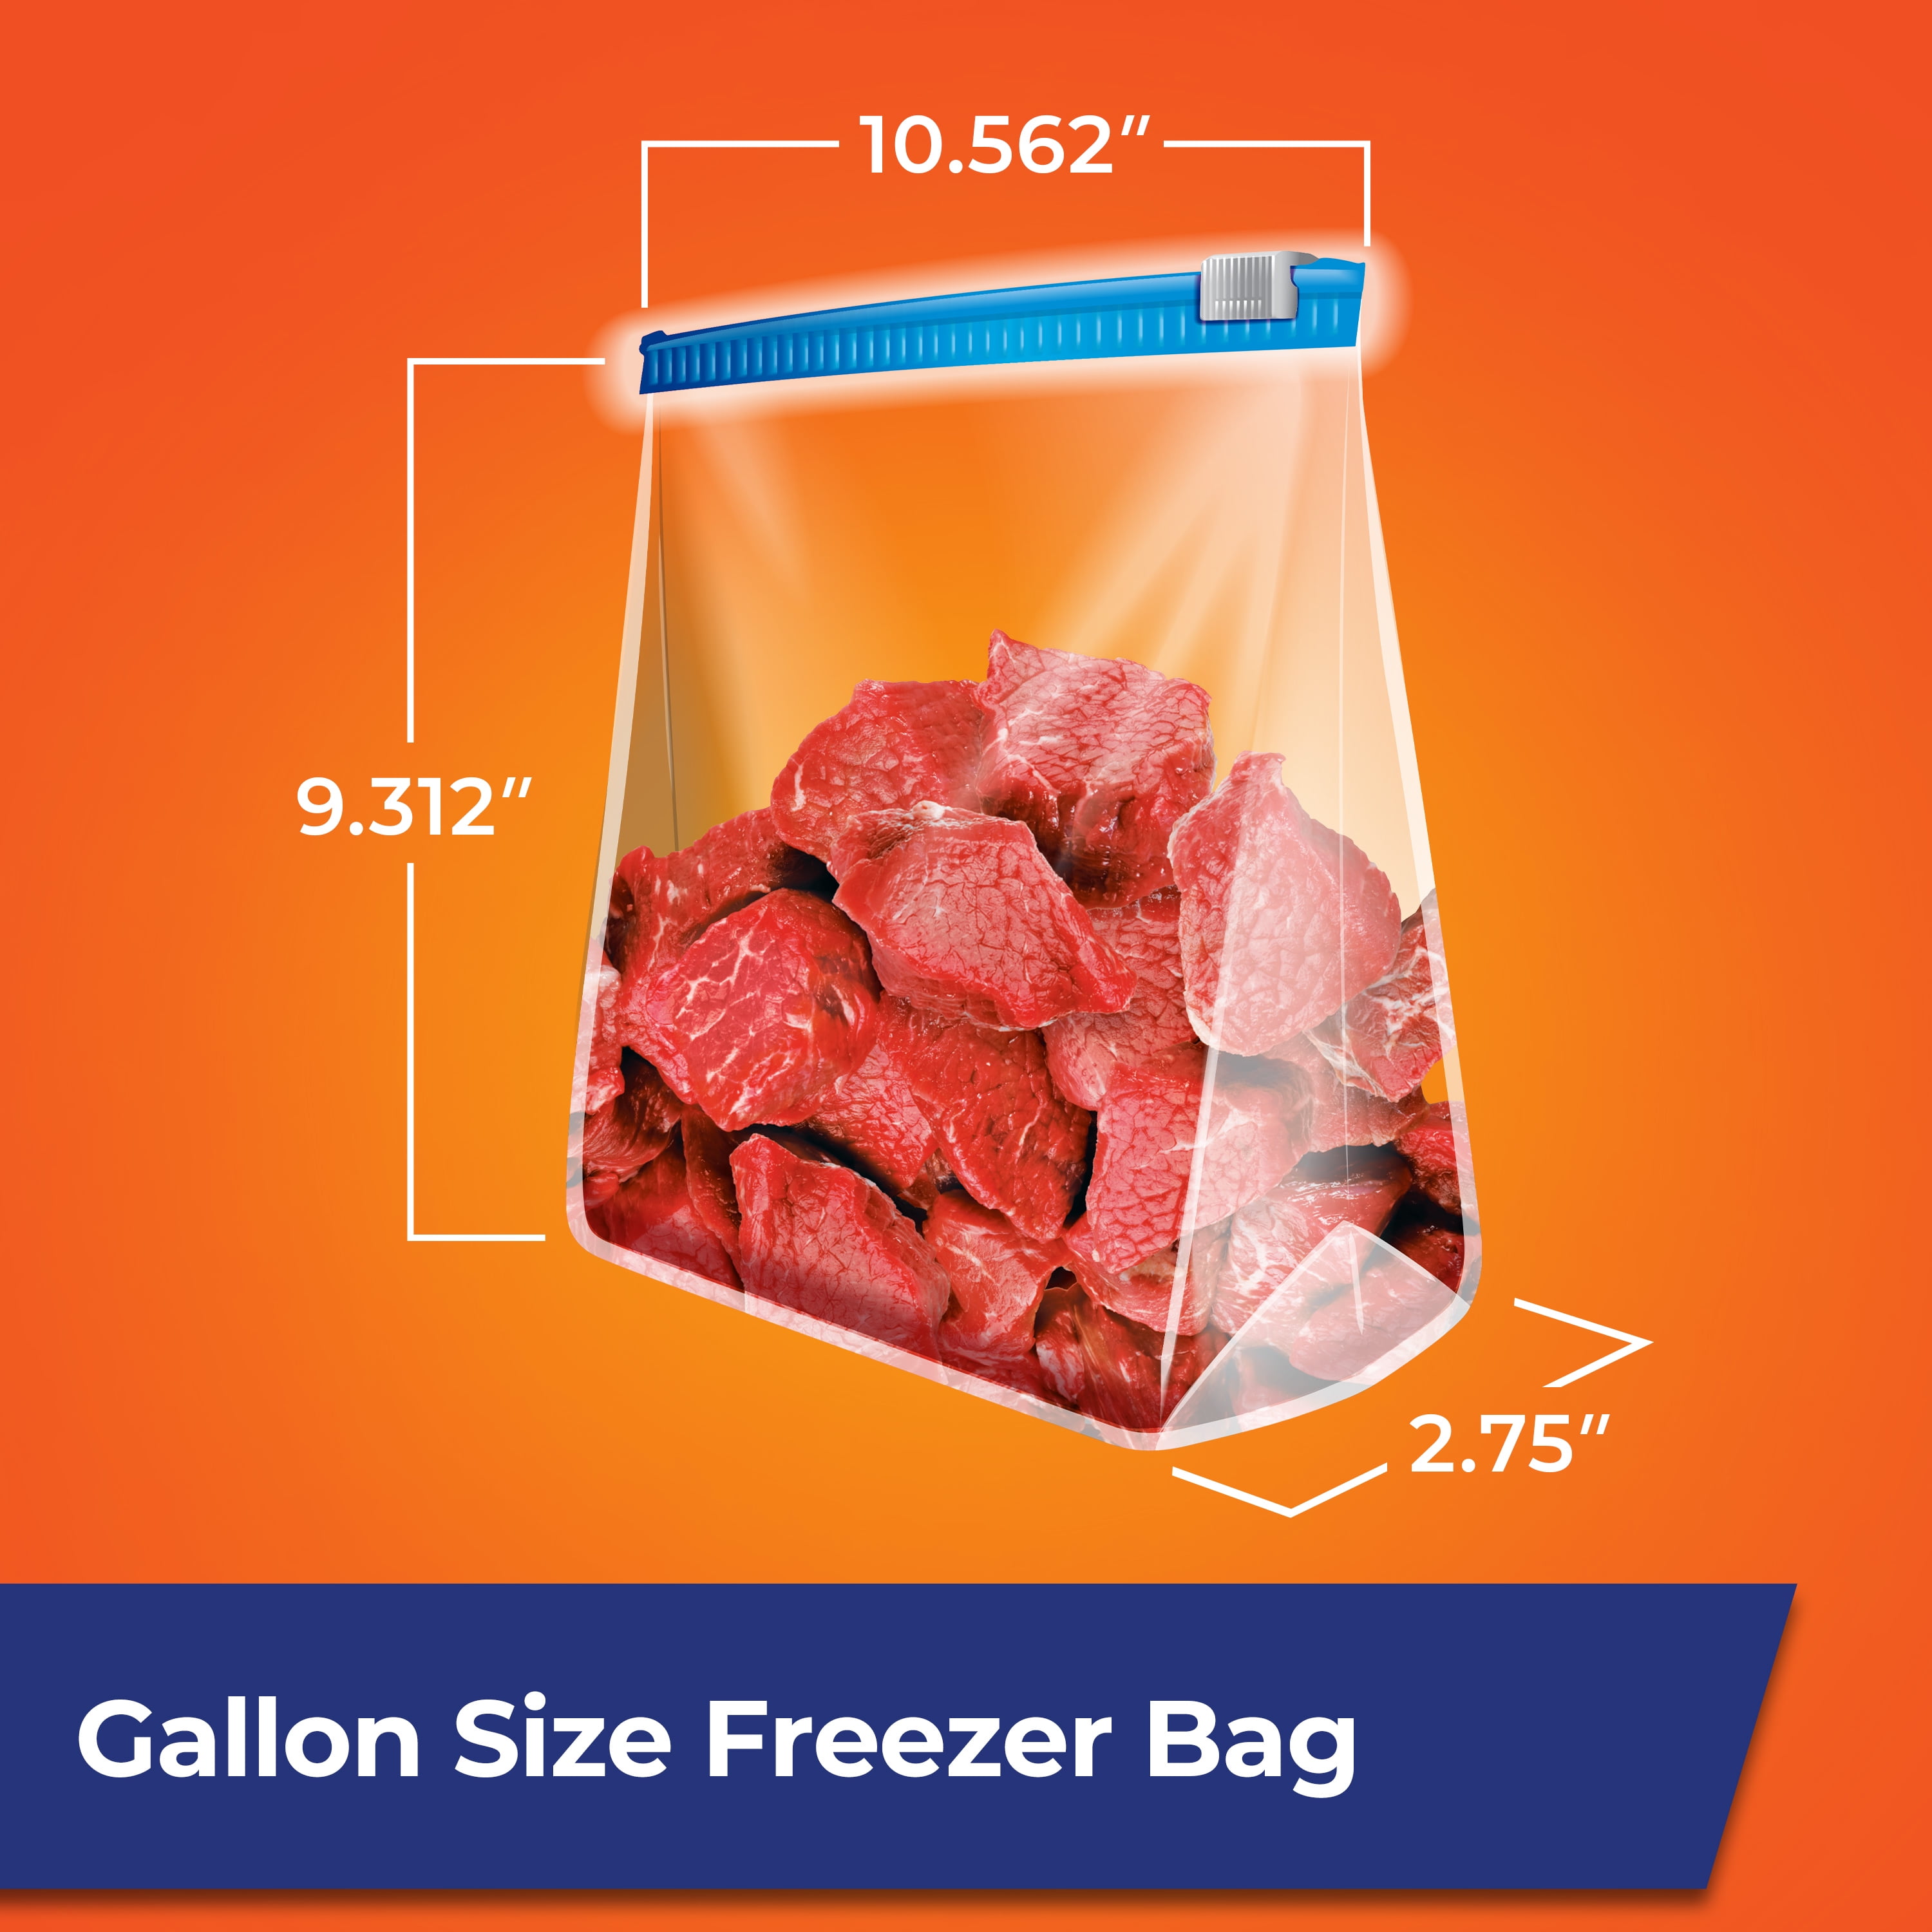 [ 10 Count ] Slider 2 Gallon Food Storage Freezer Bags, Stand & Expand Big Resealable Zipper Bags, for Meat, Kitchen, Office, Clothing, Toys, Seasonal